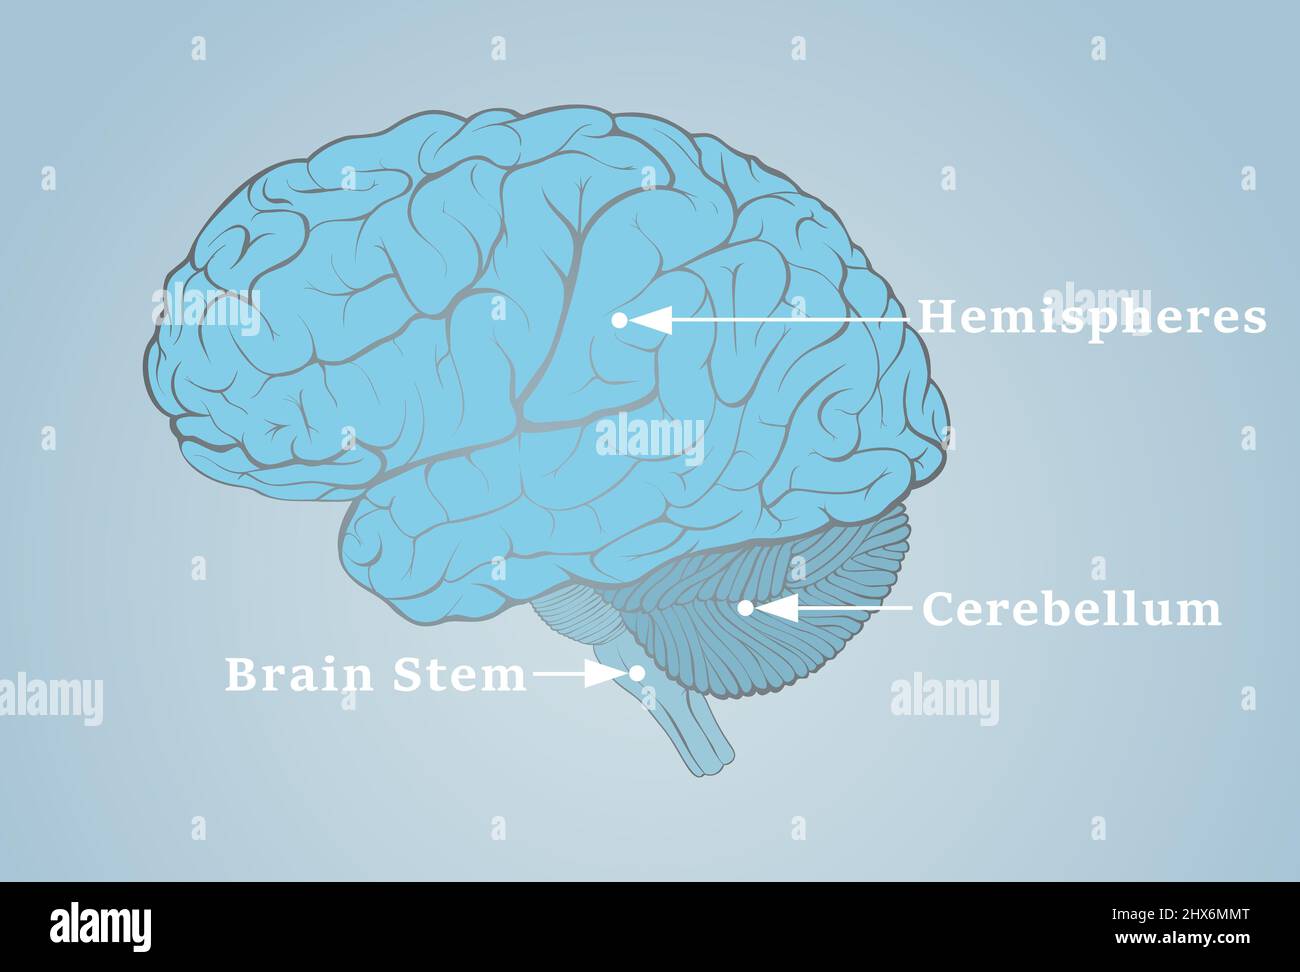 Human brain image with the structures indicated by the arrows Stock Photo